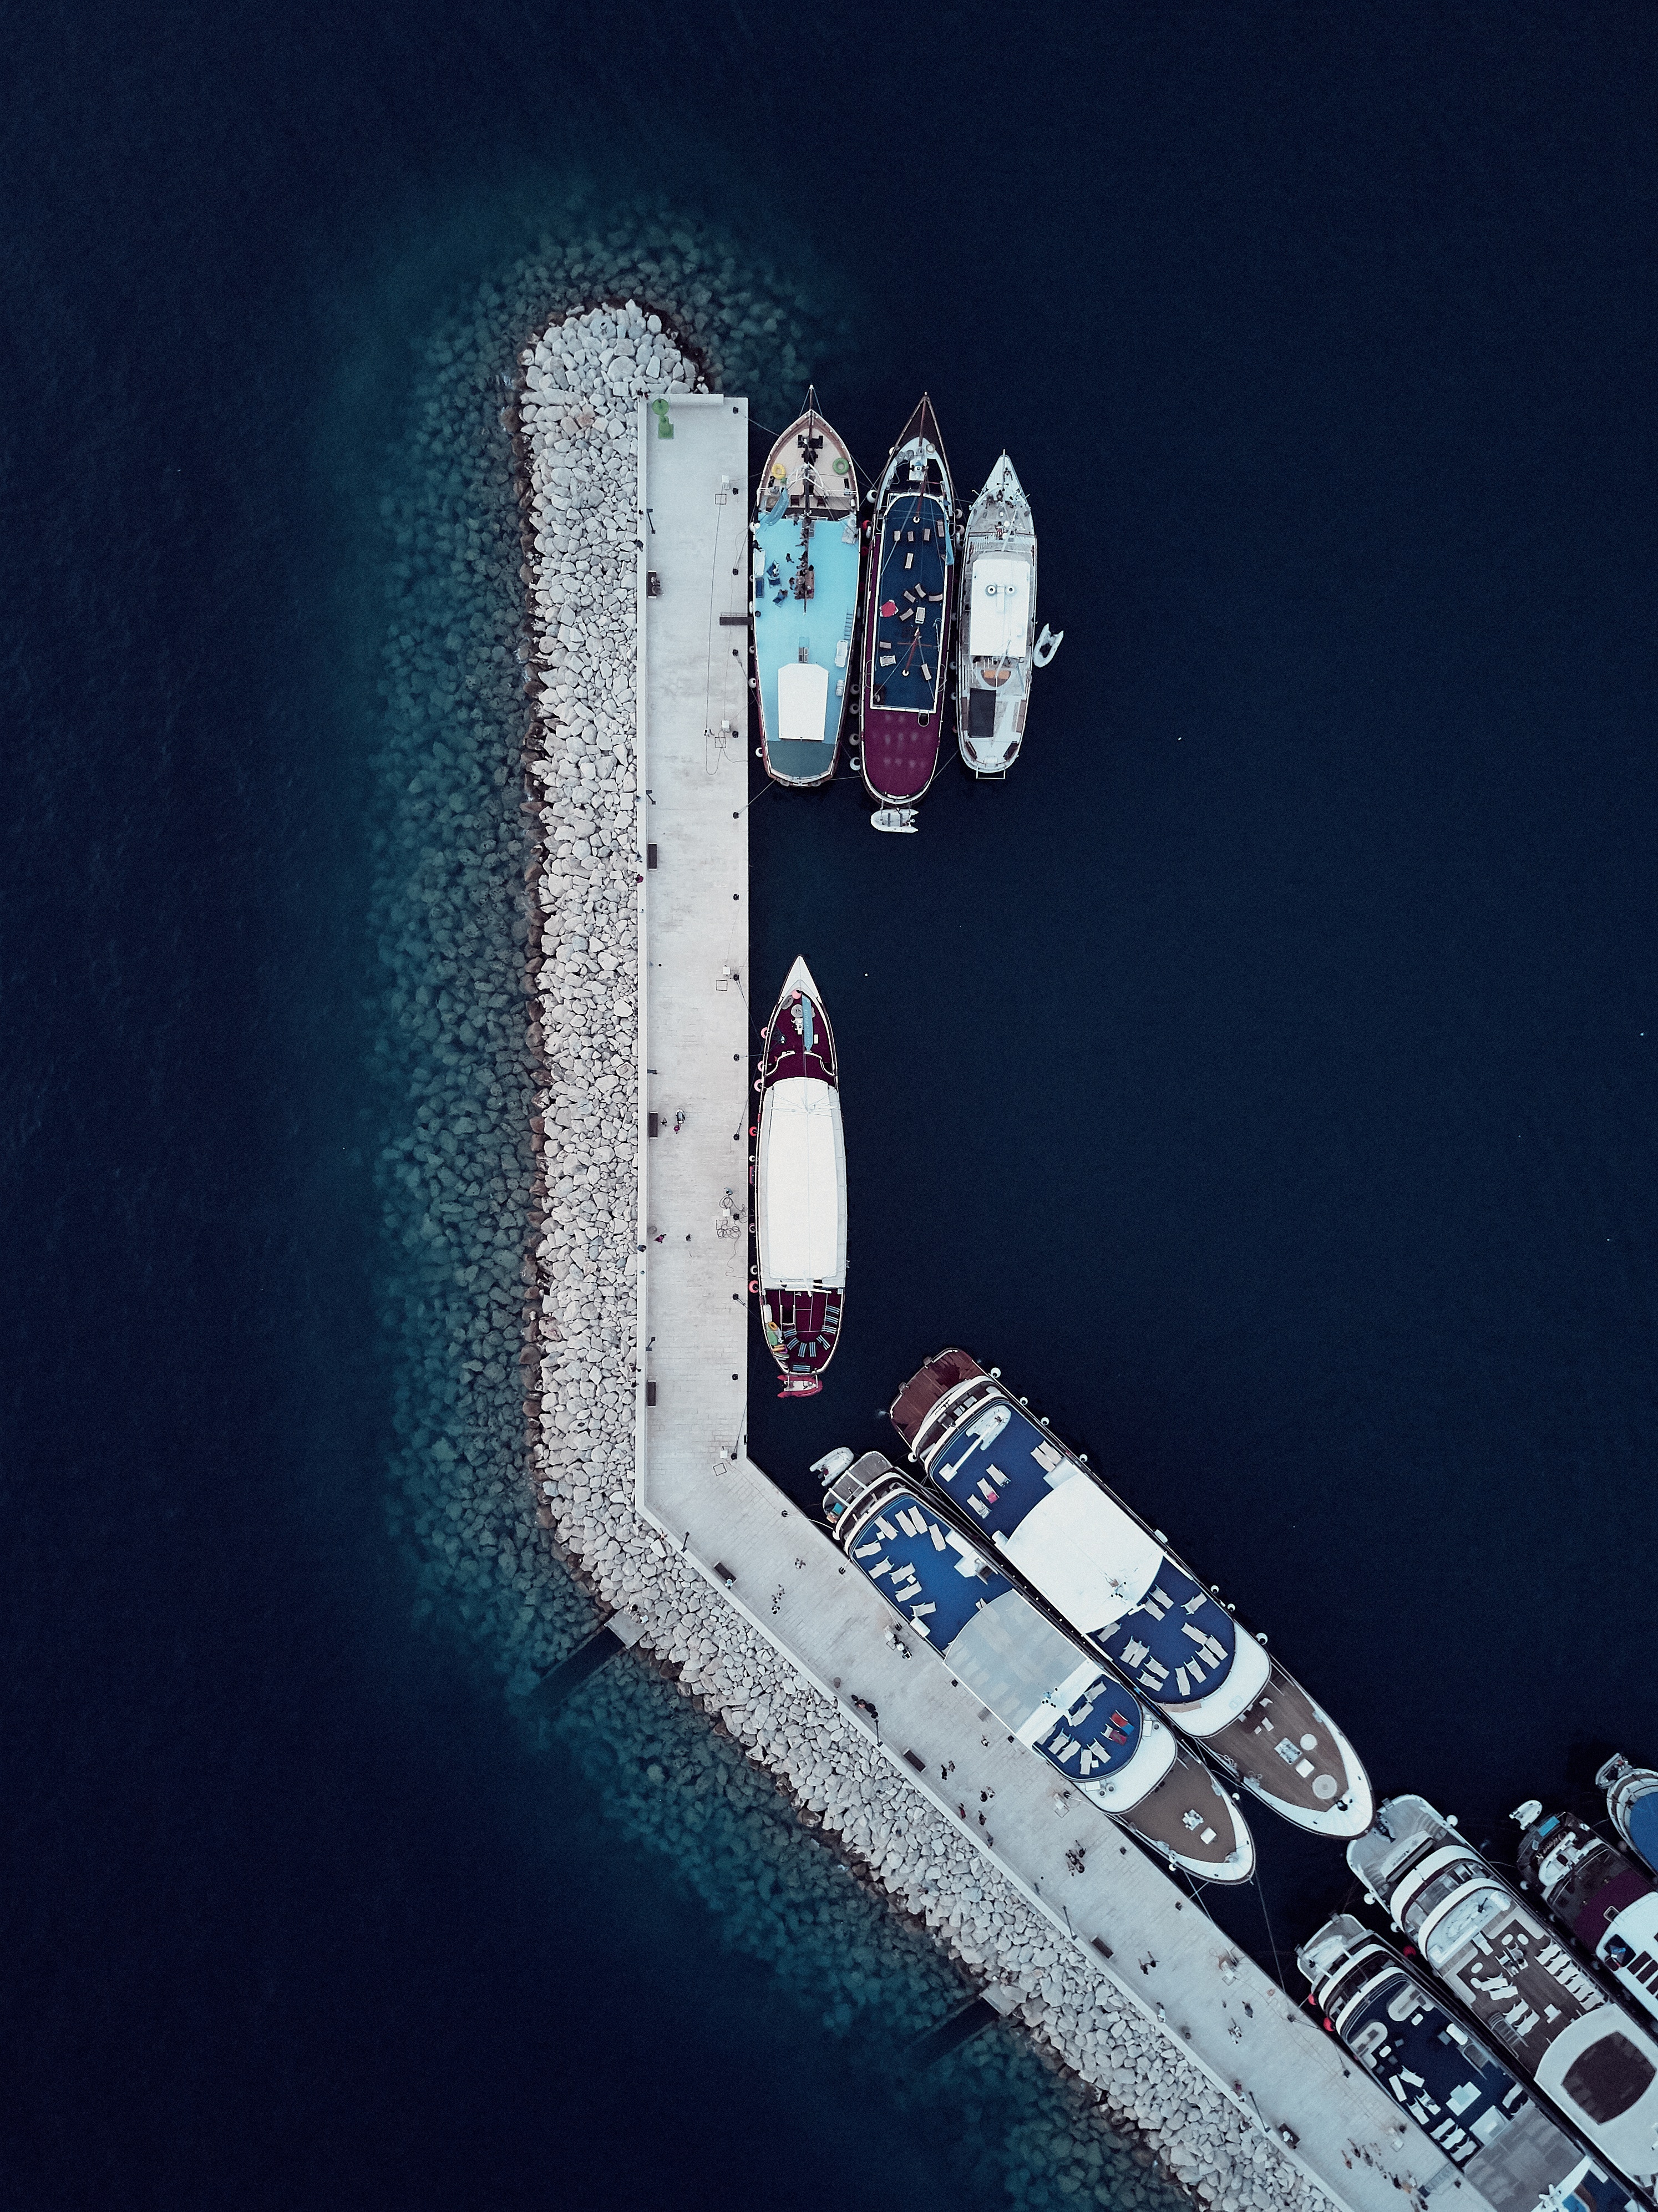 nature, boats, view from above, pier, wharf, berth